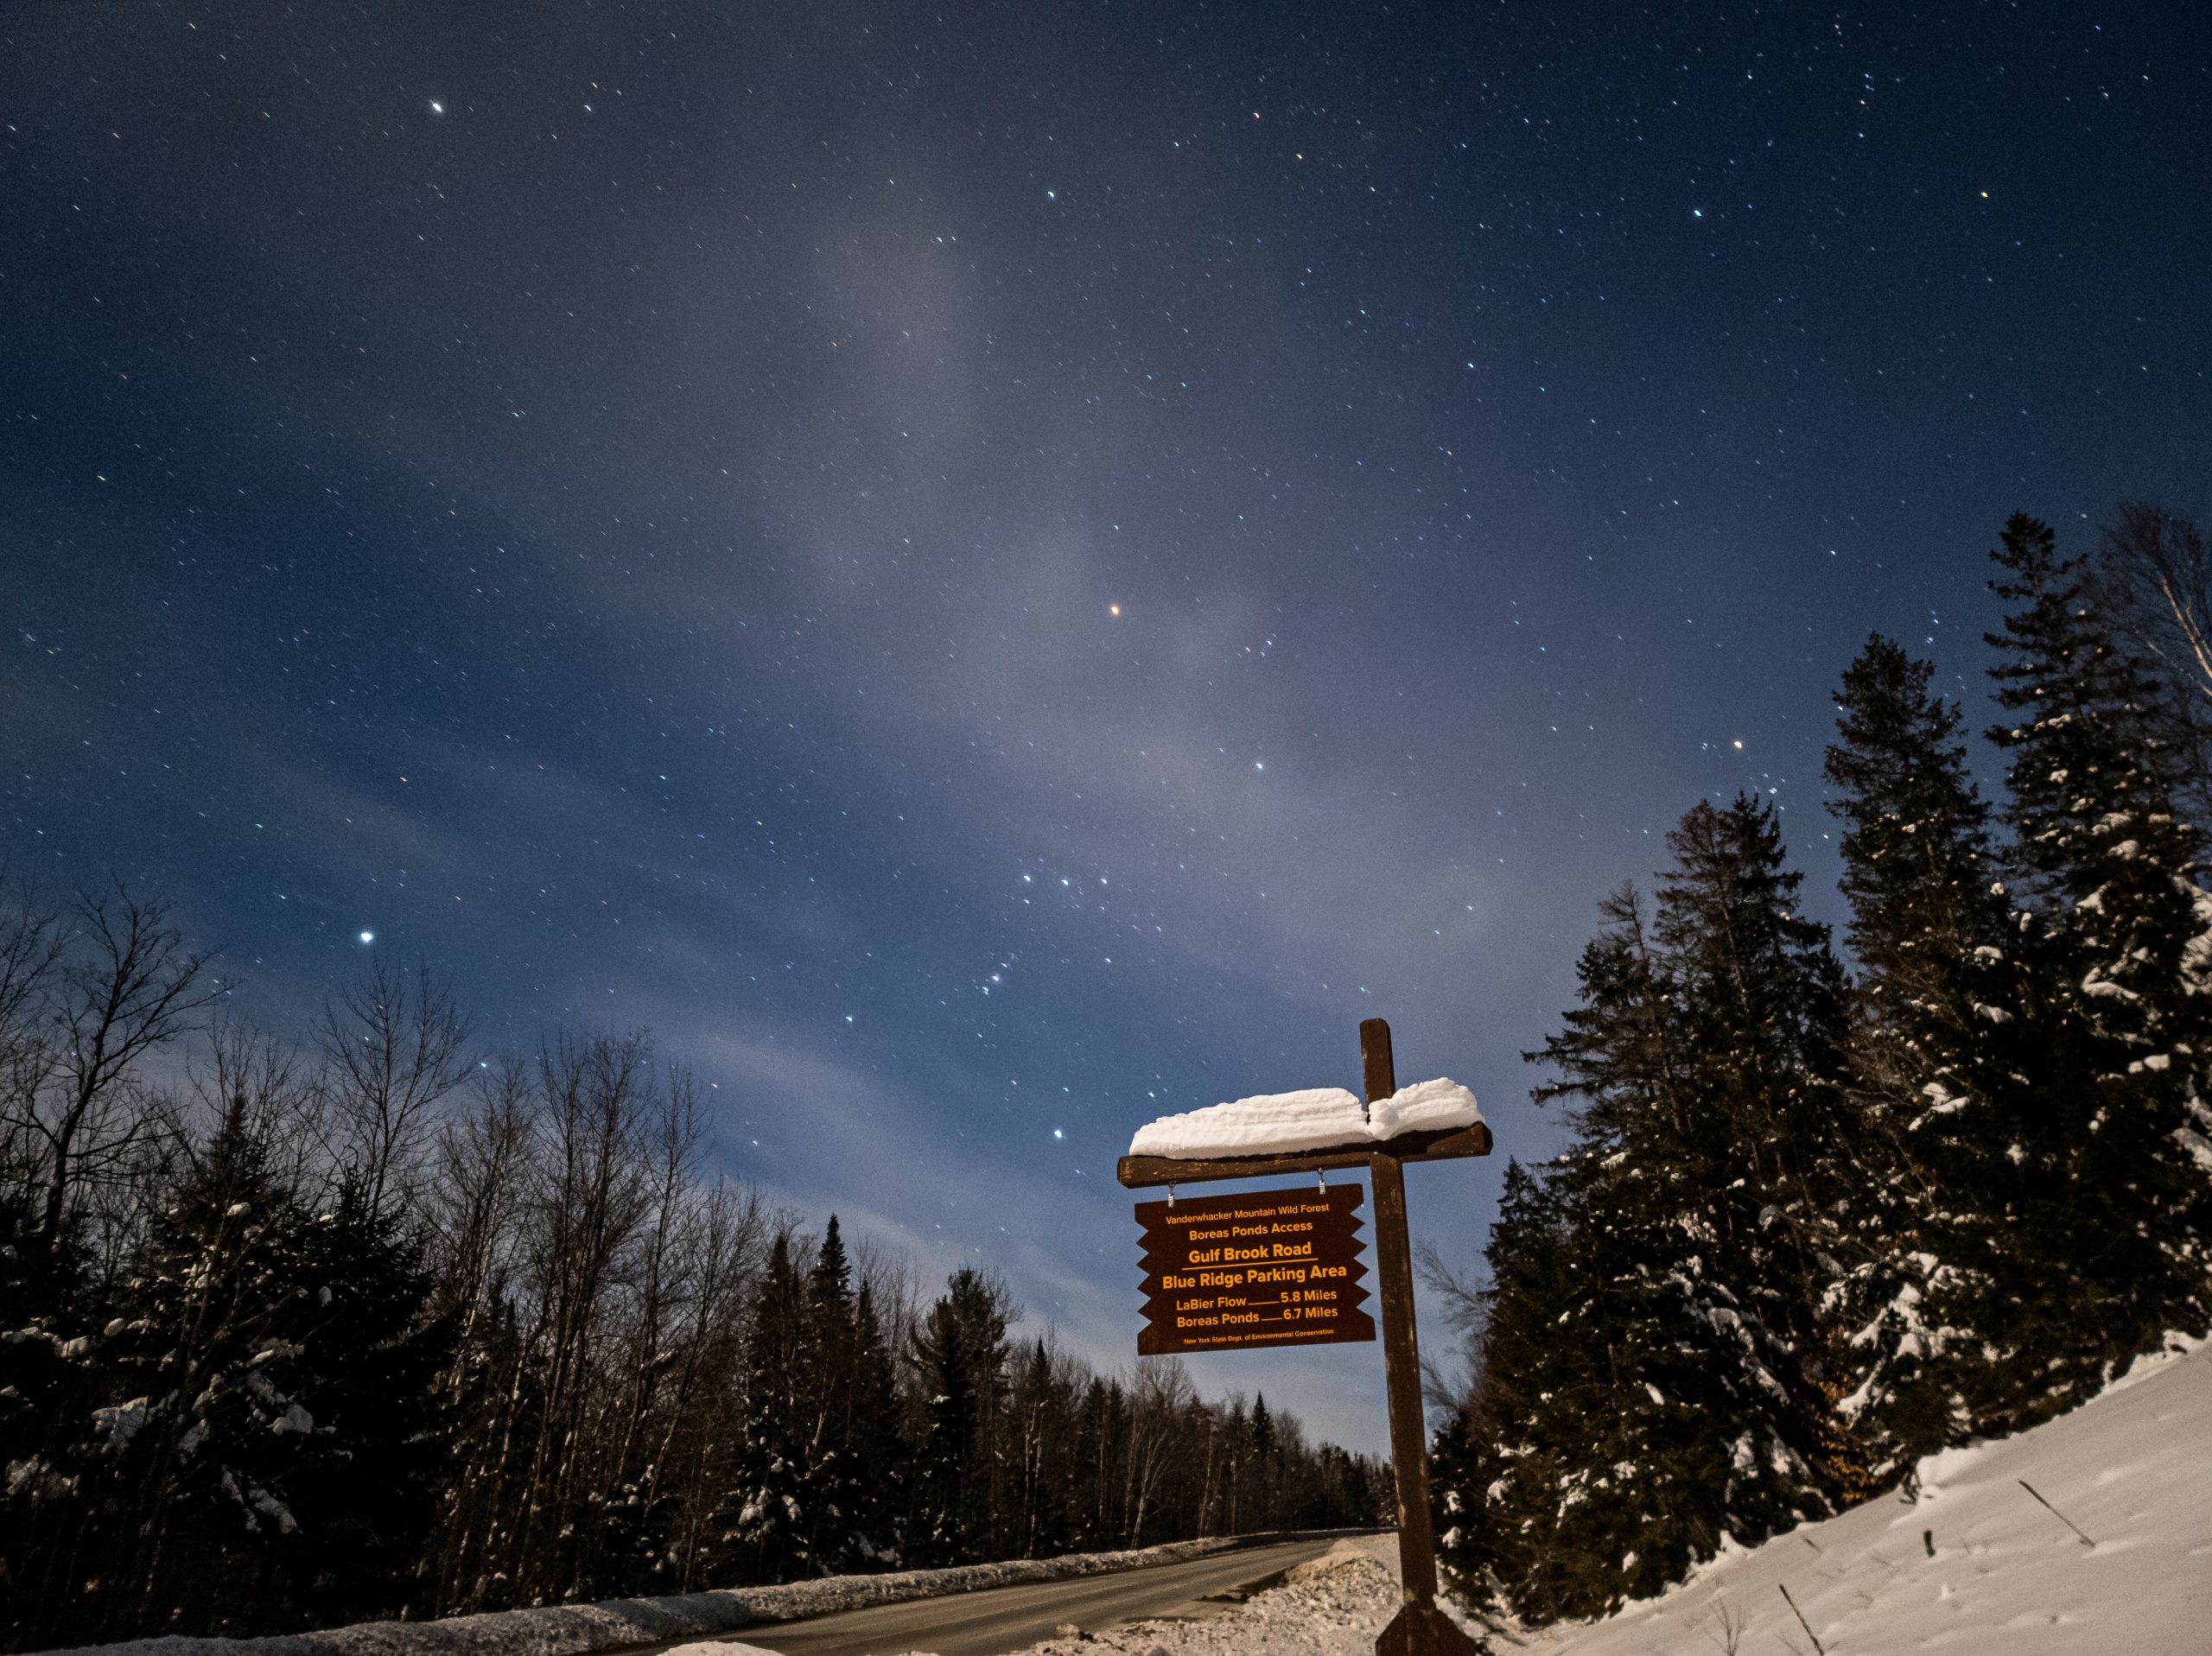 A starry night sky on a snowy Adirondack road